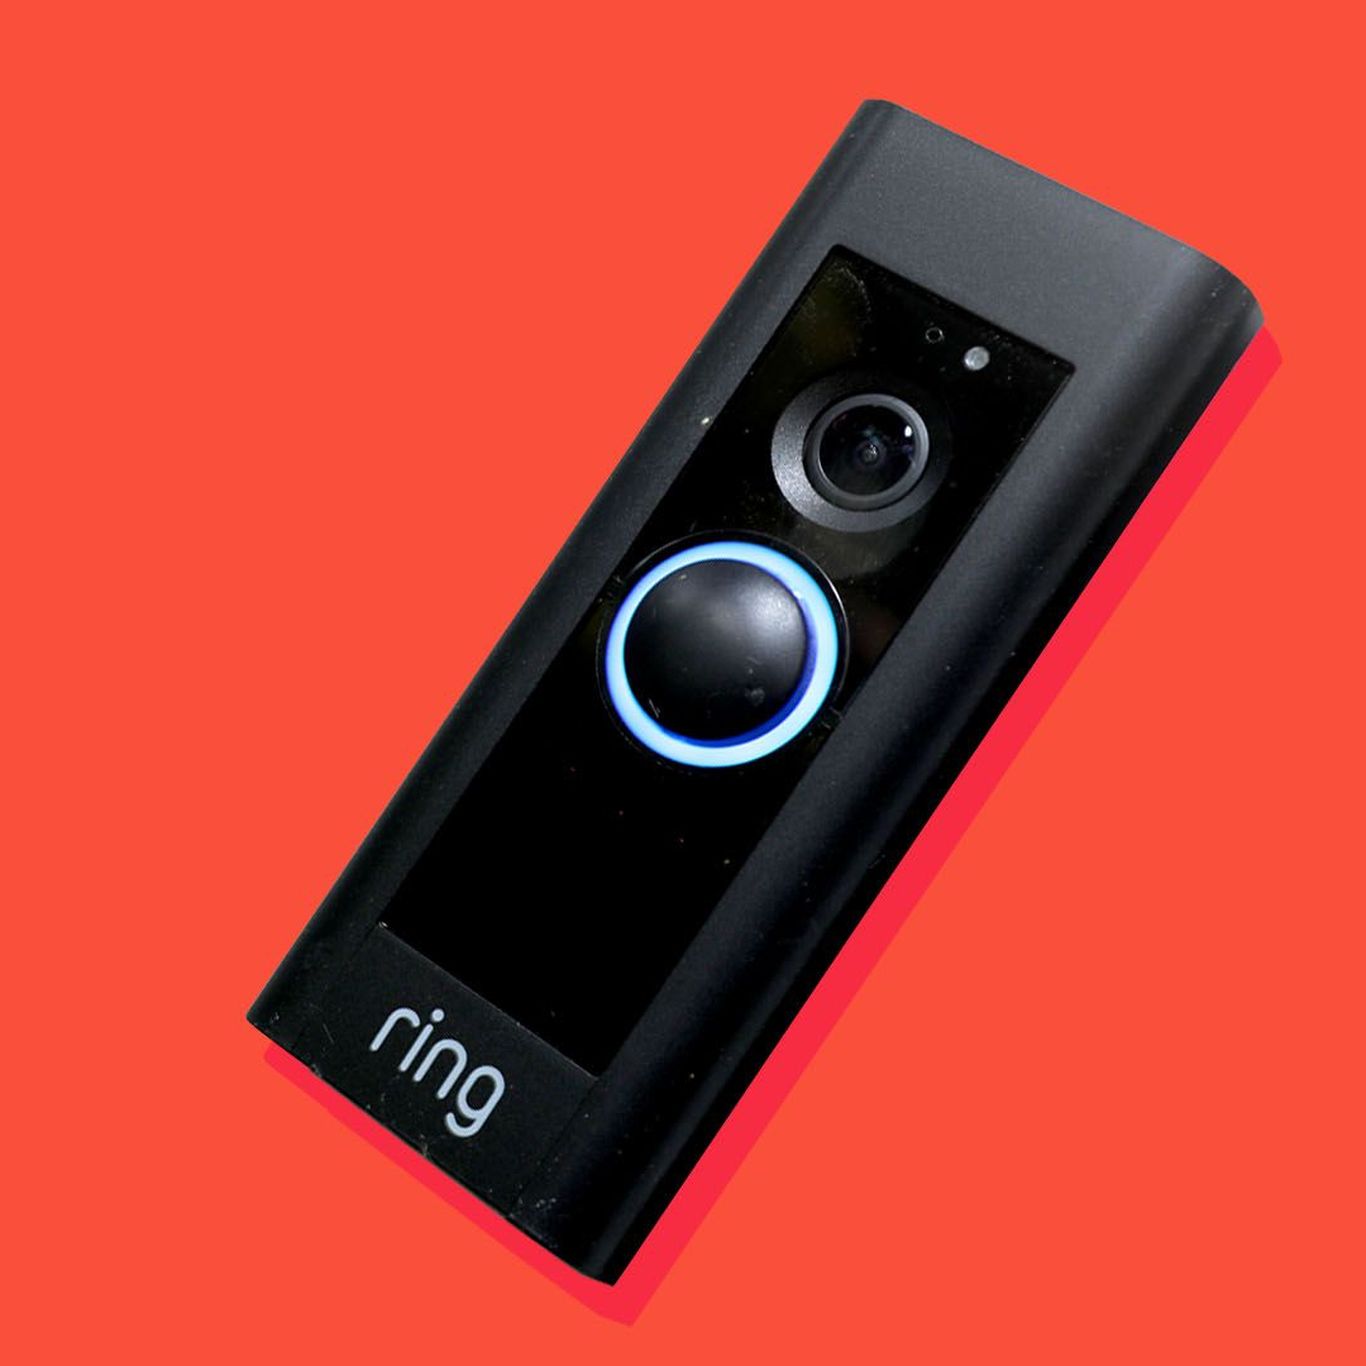 s doorbell camera Ring is working with police – and